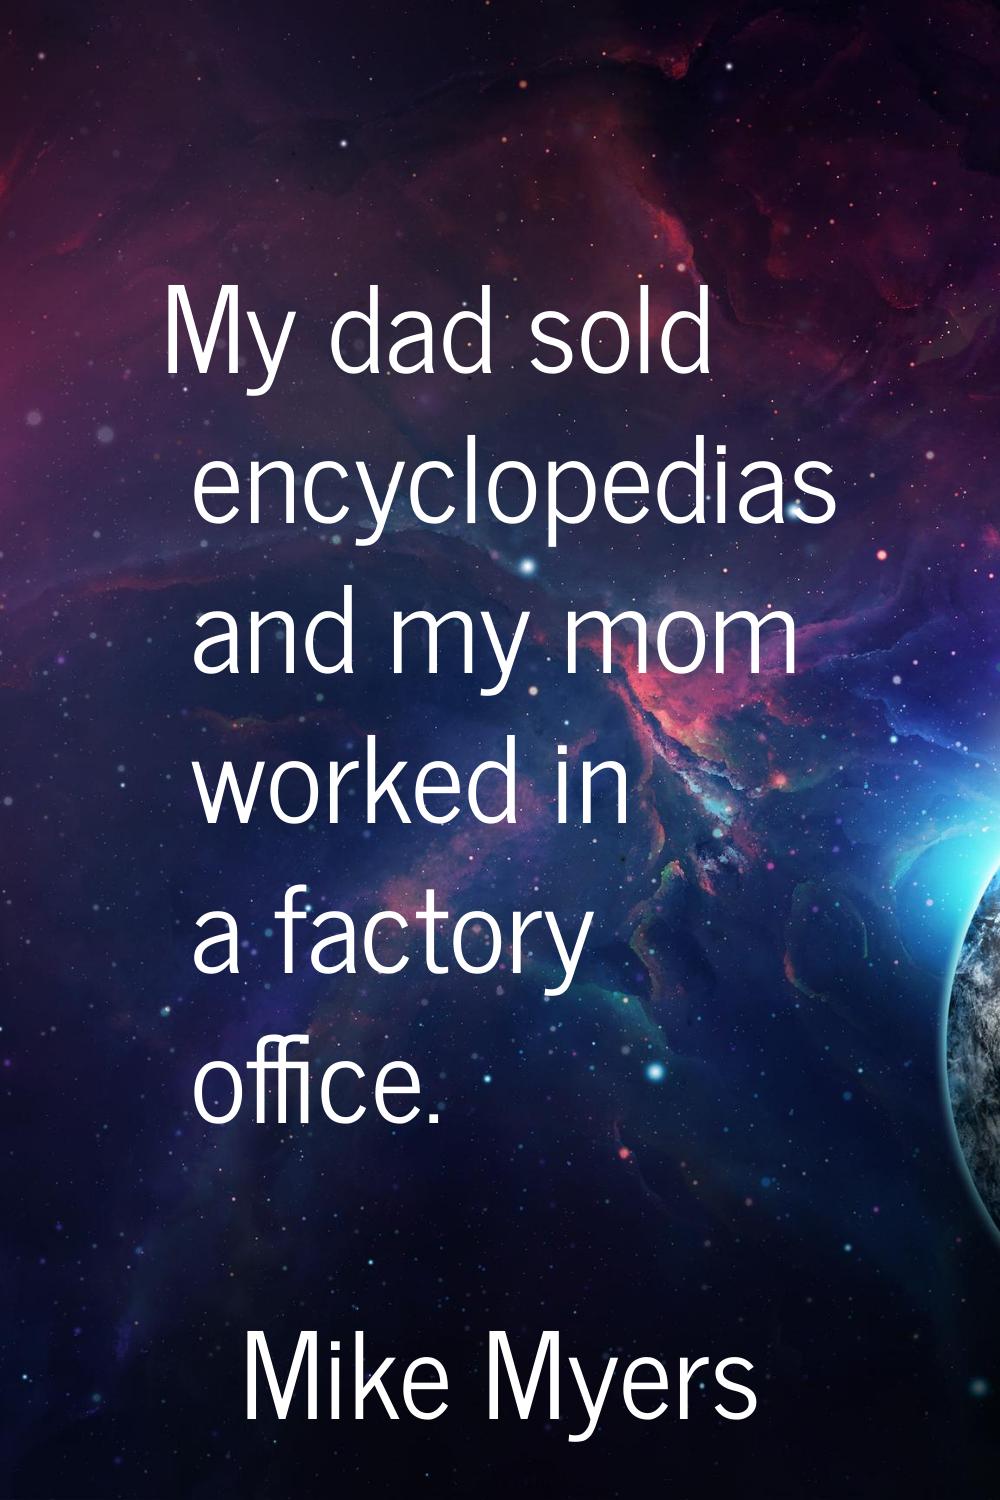 My dad sold encyclopedias and my mom worked in a factory office.